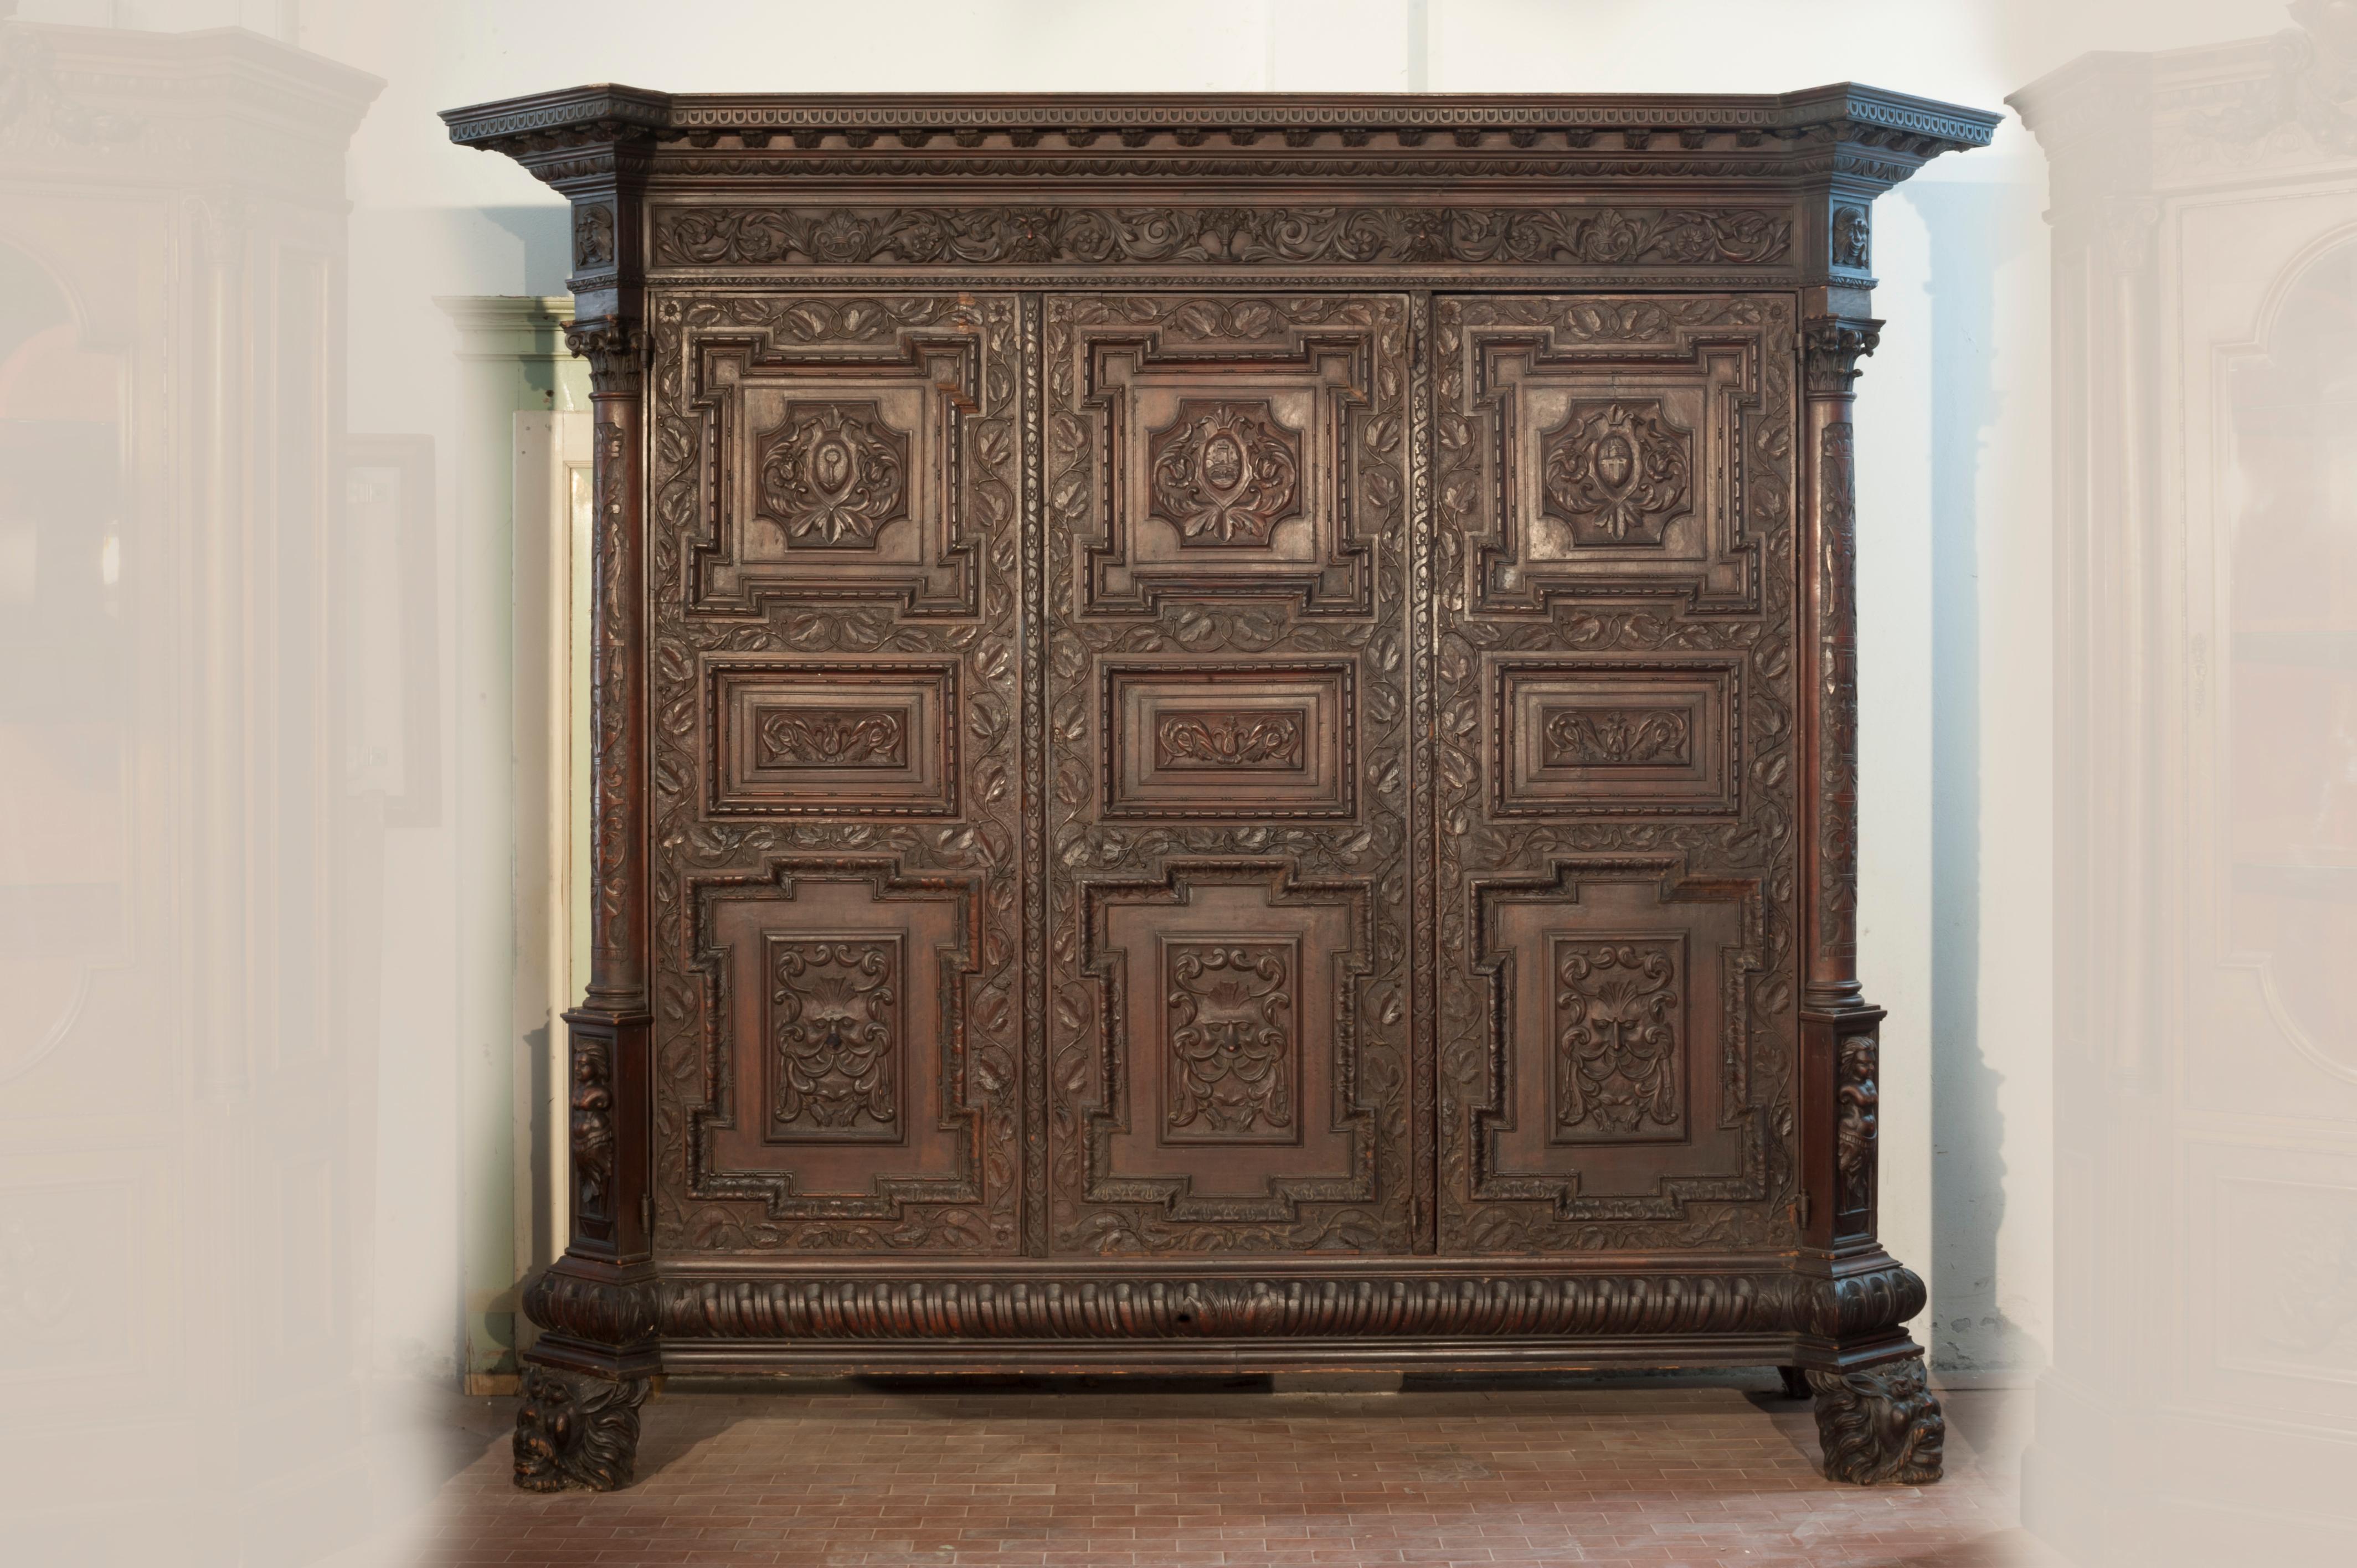 Wardrobe with 3 doors, in renaissance style, enriched with carvings of considerable elaboration and difficulty of execution. Made in France at the end of the 18th century, beginning of the 19th century. From the remarkable scenic result, also thanks